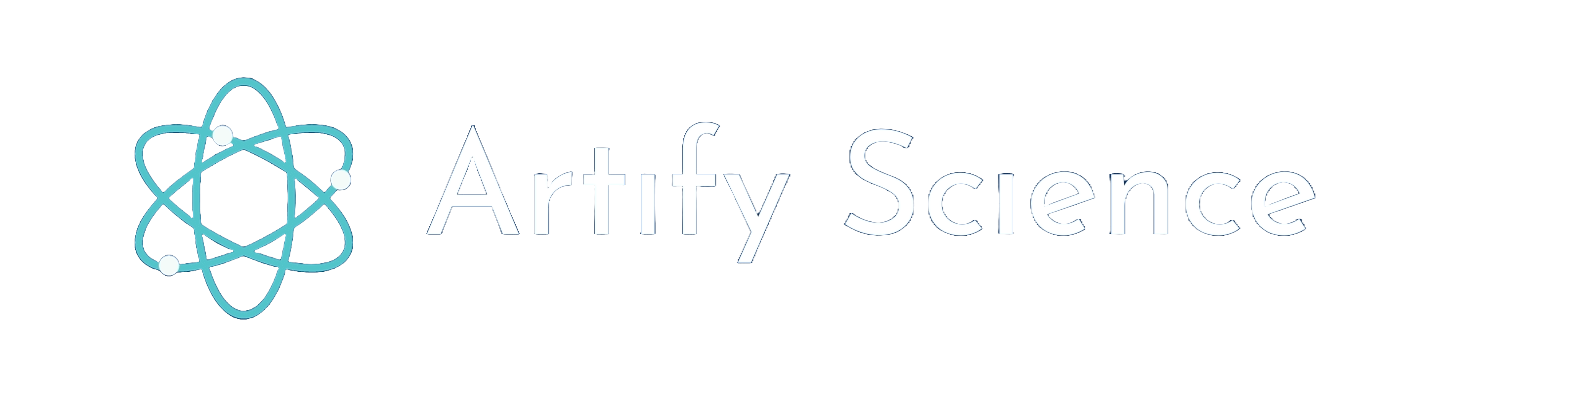 Artify Science